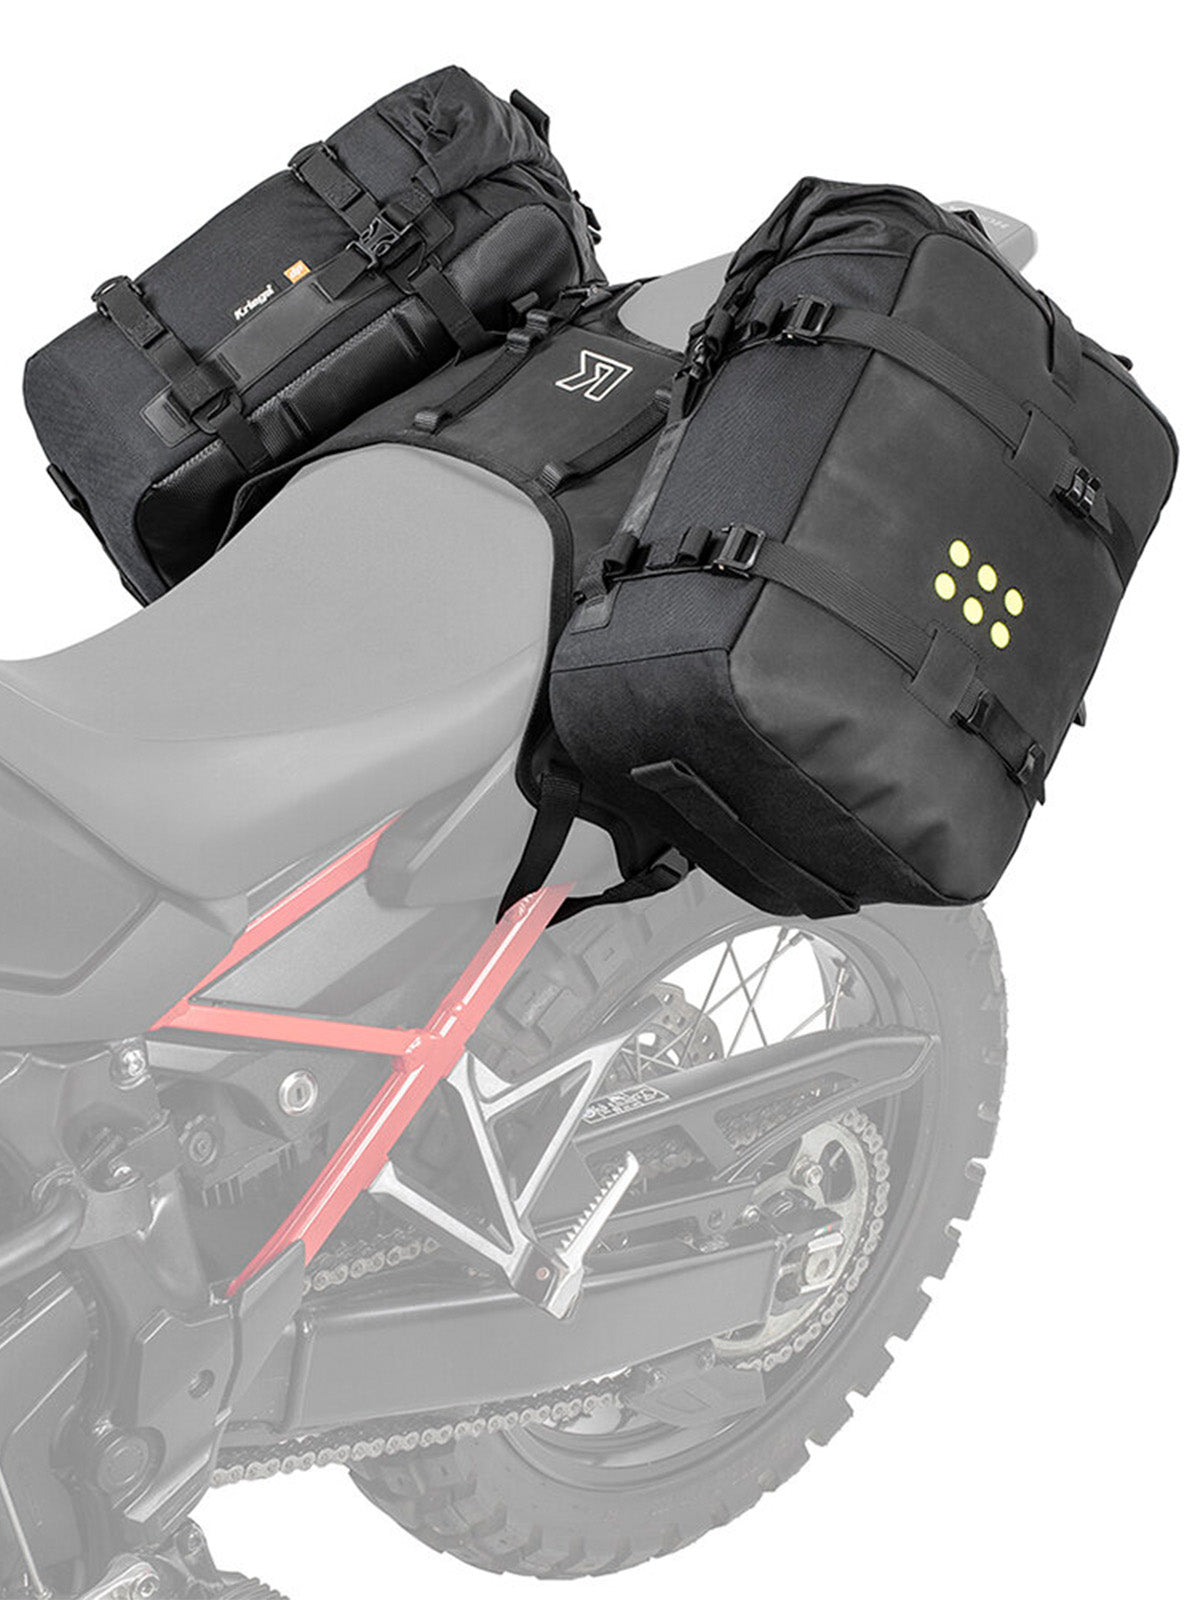 Kriega OS BASE Honda CRF 1100L Africa Twin with two OS18 adventure packs